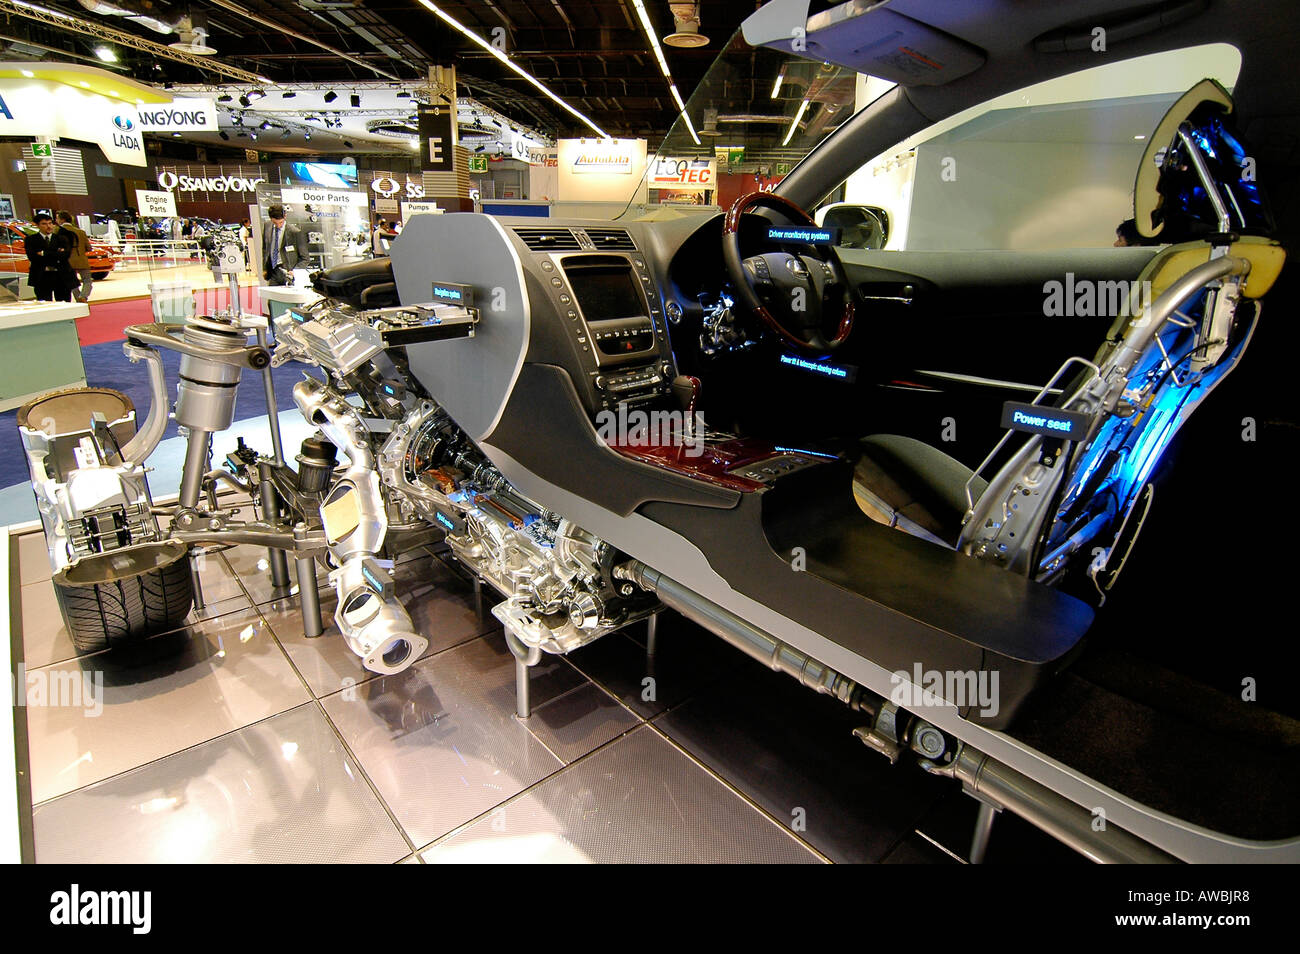 Internal skeleton of a car exhibited at the Paris World Car exhibition Stock Photo